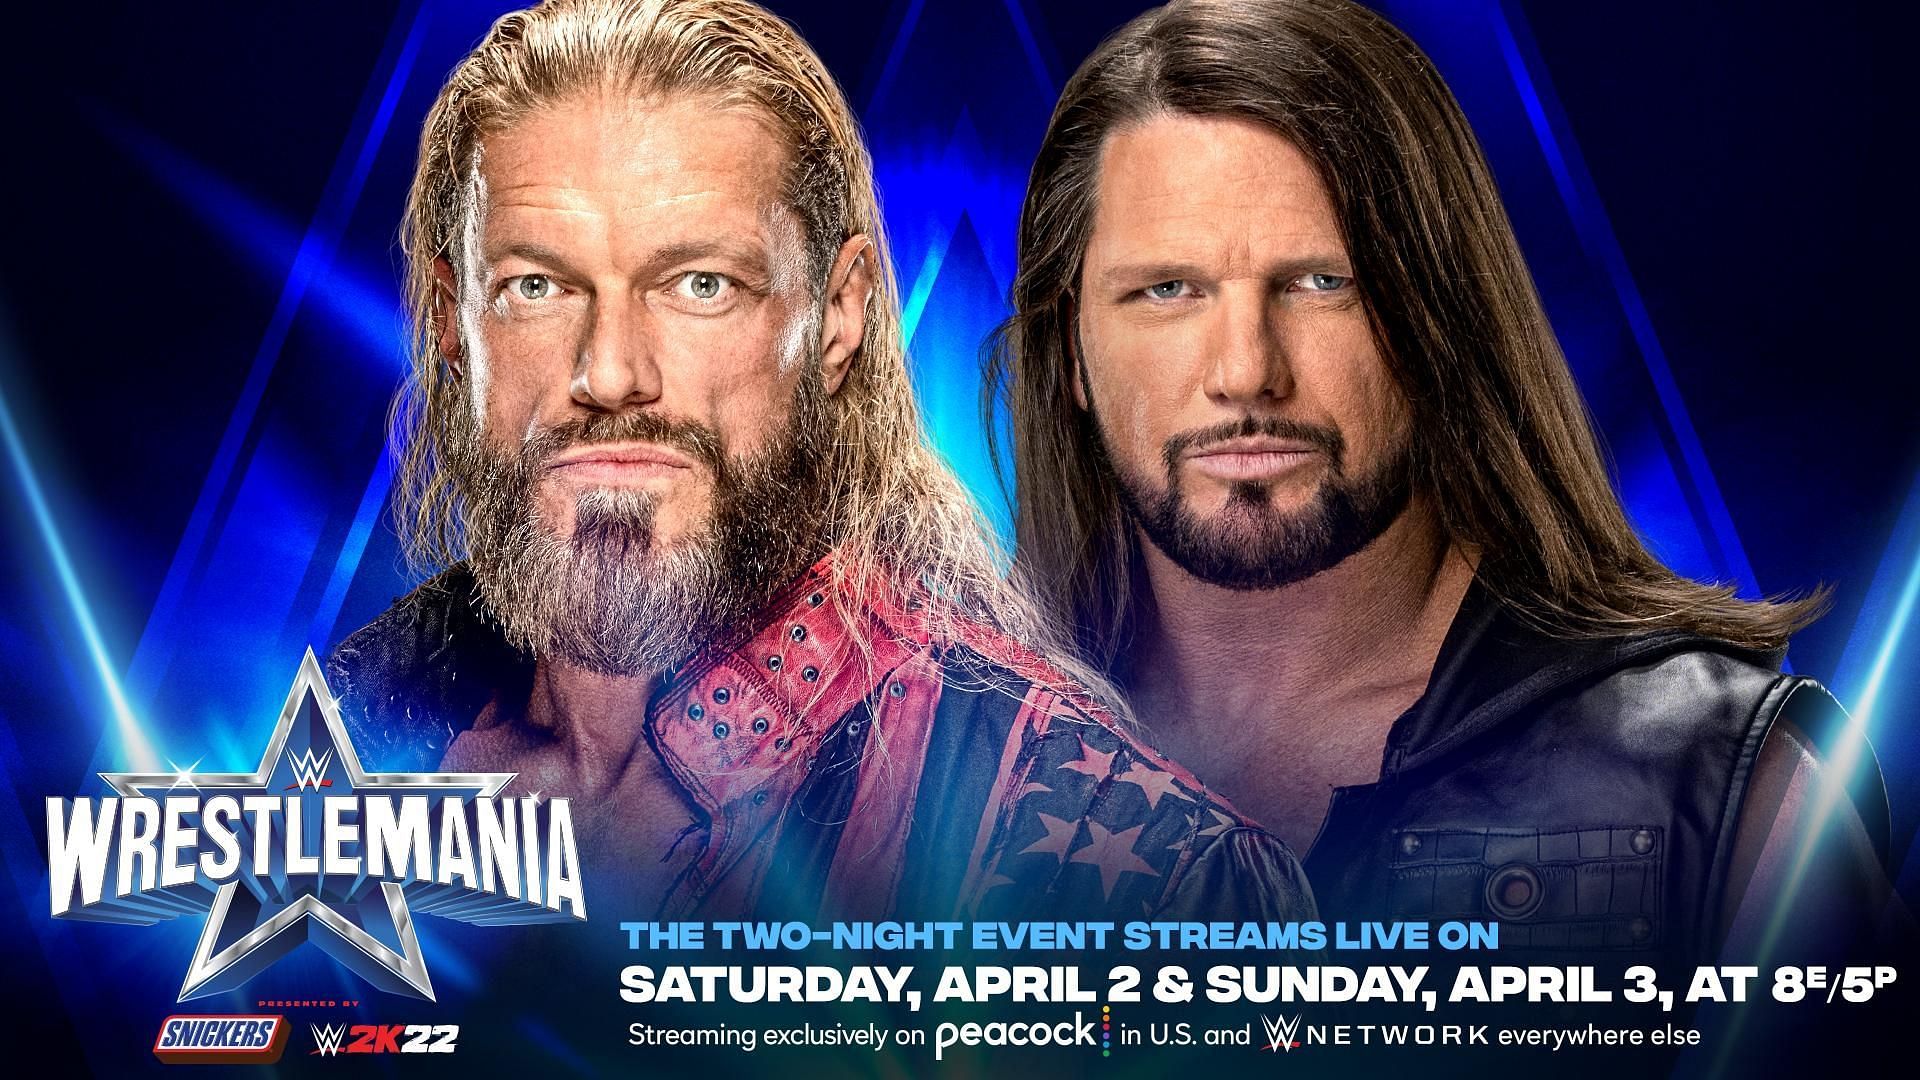 Edge will face AJ Styles on The Grandest Stage of Them All